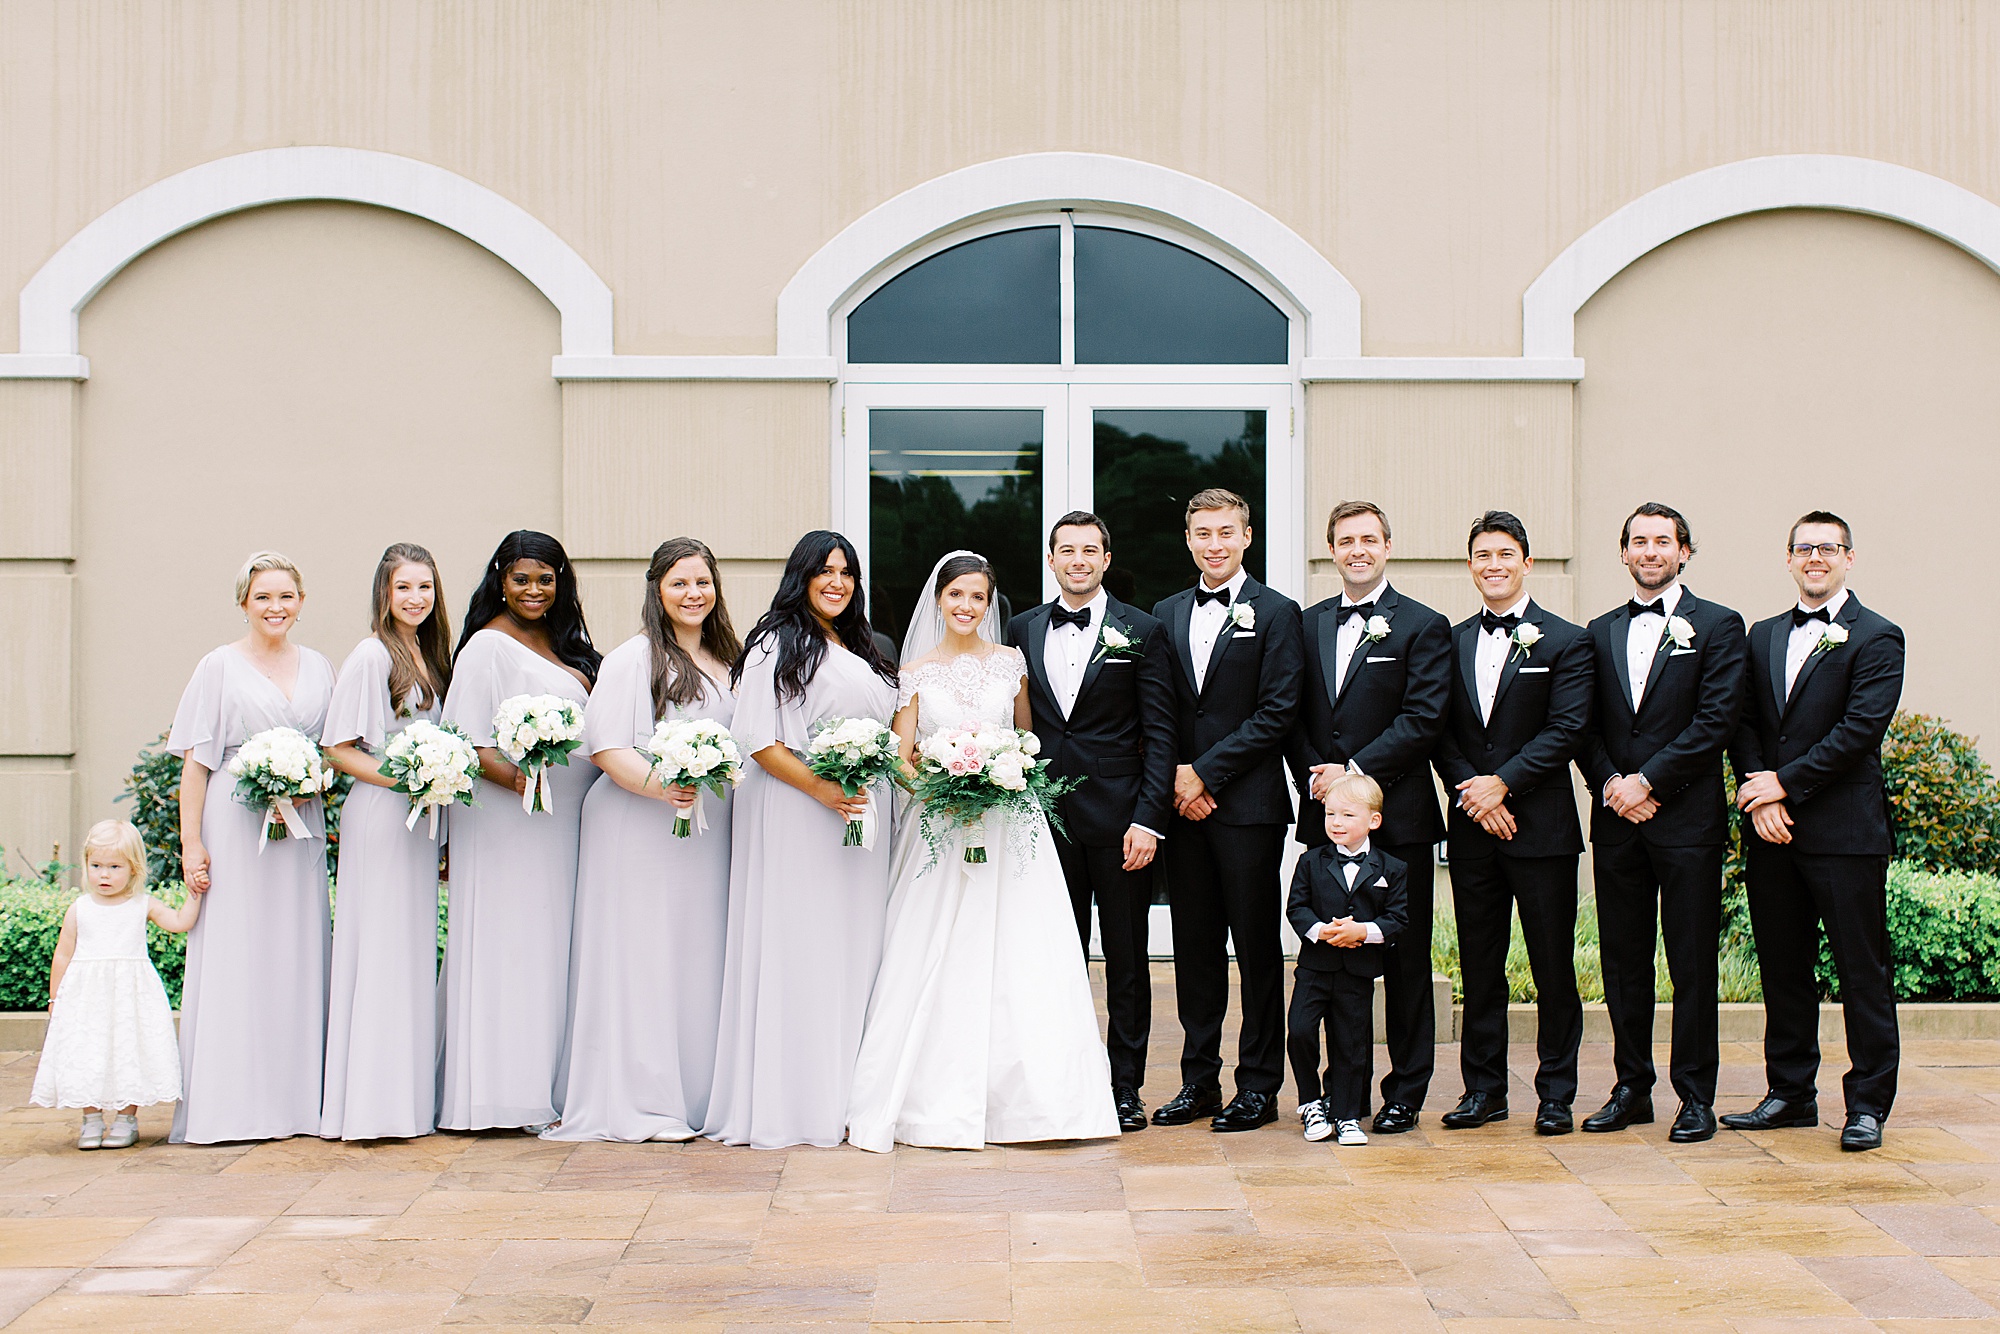 wedding party in pale grey gowns and classic tuxes pose with newlyweds